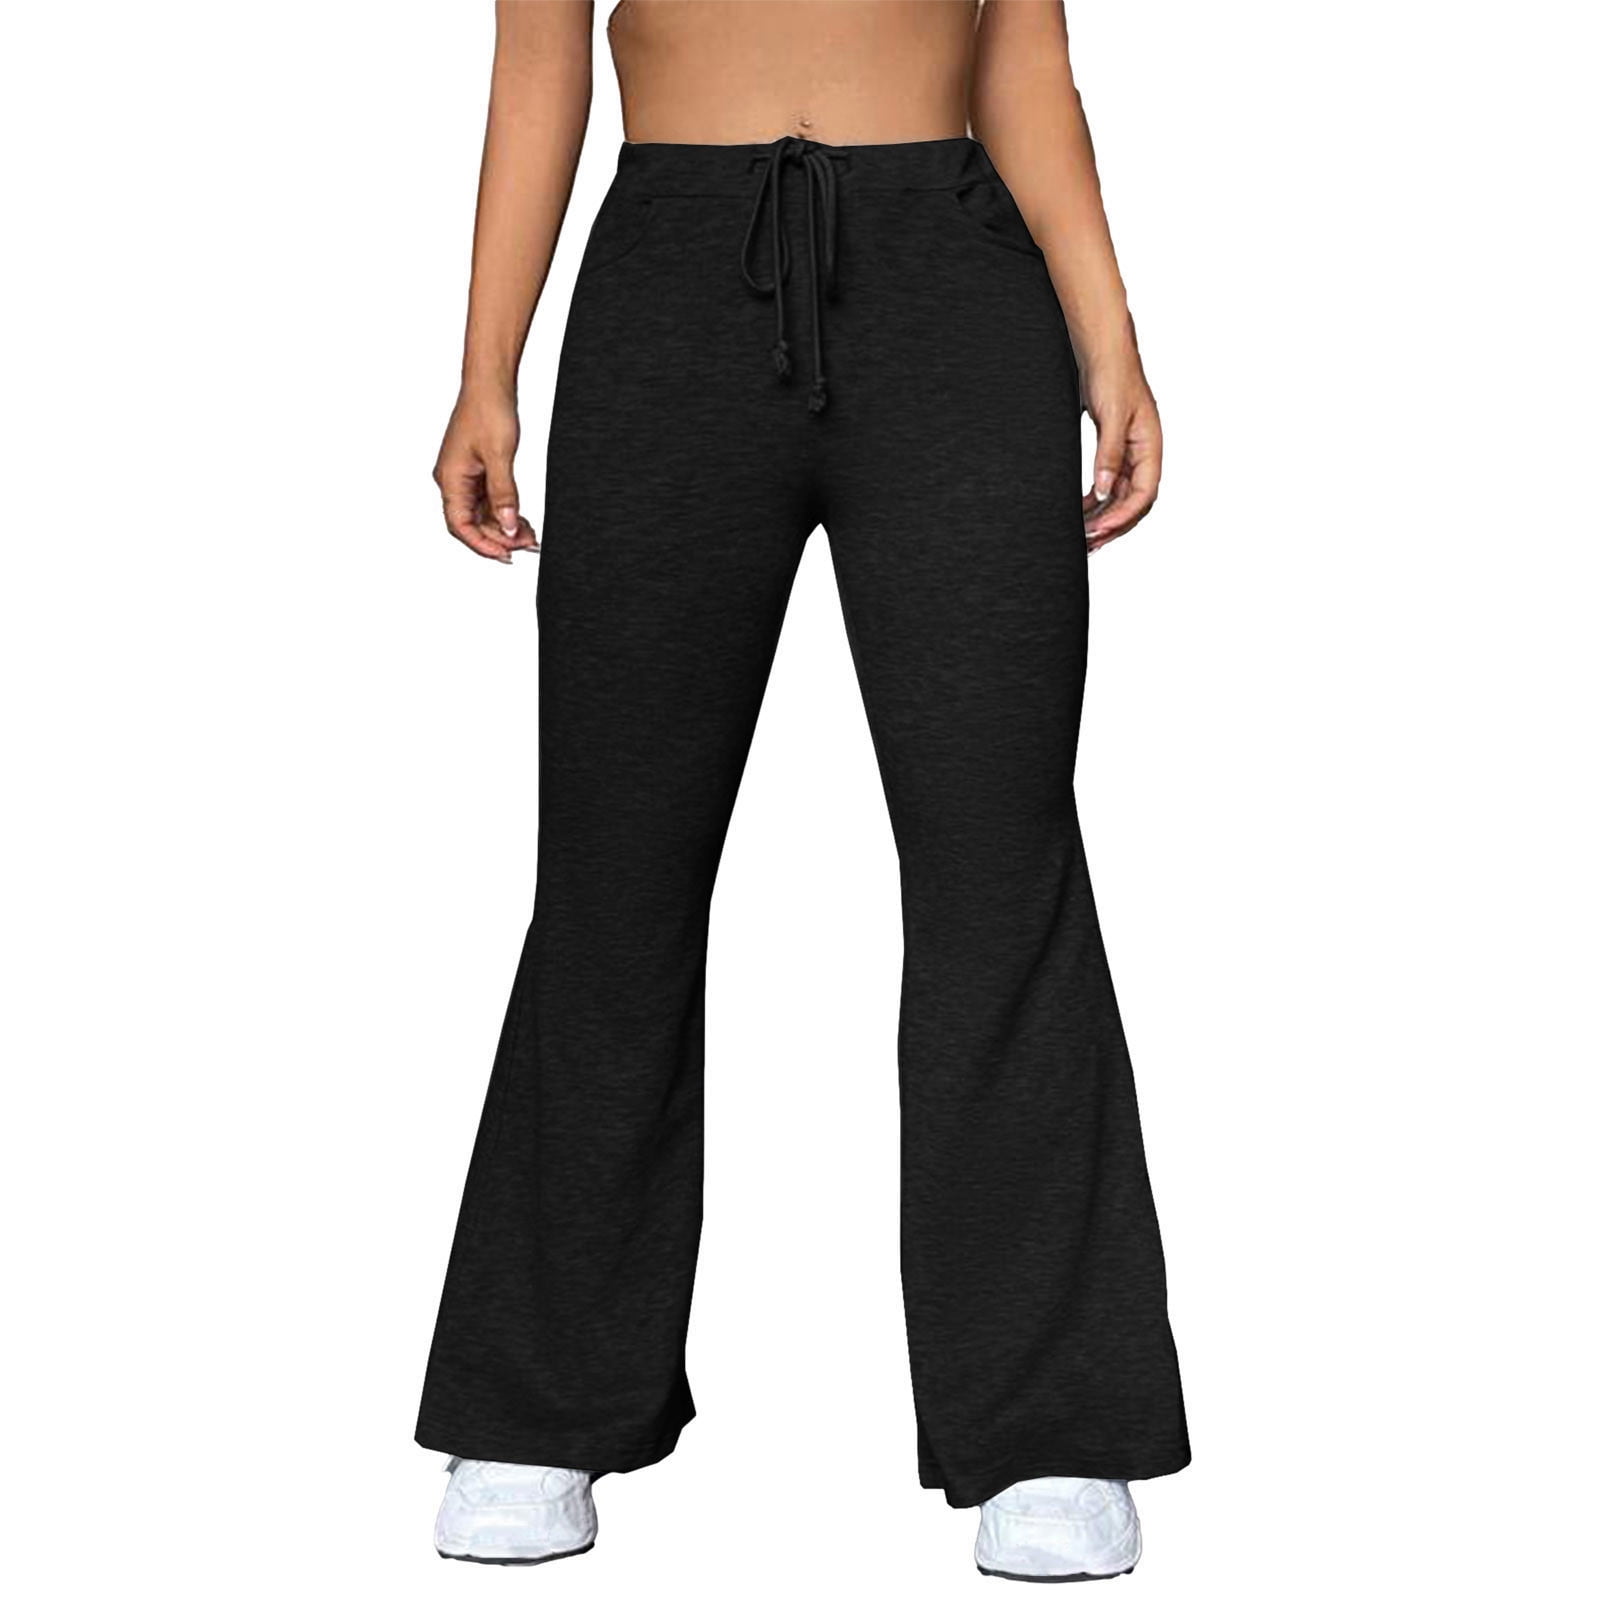 Womens Wide Leg Yoga Best Flare Leggings Casual Black Bootcut Trousers For  Gym And Casual Wear With Elastic Waistband From Bestclothing, $13.15